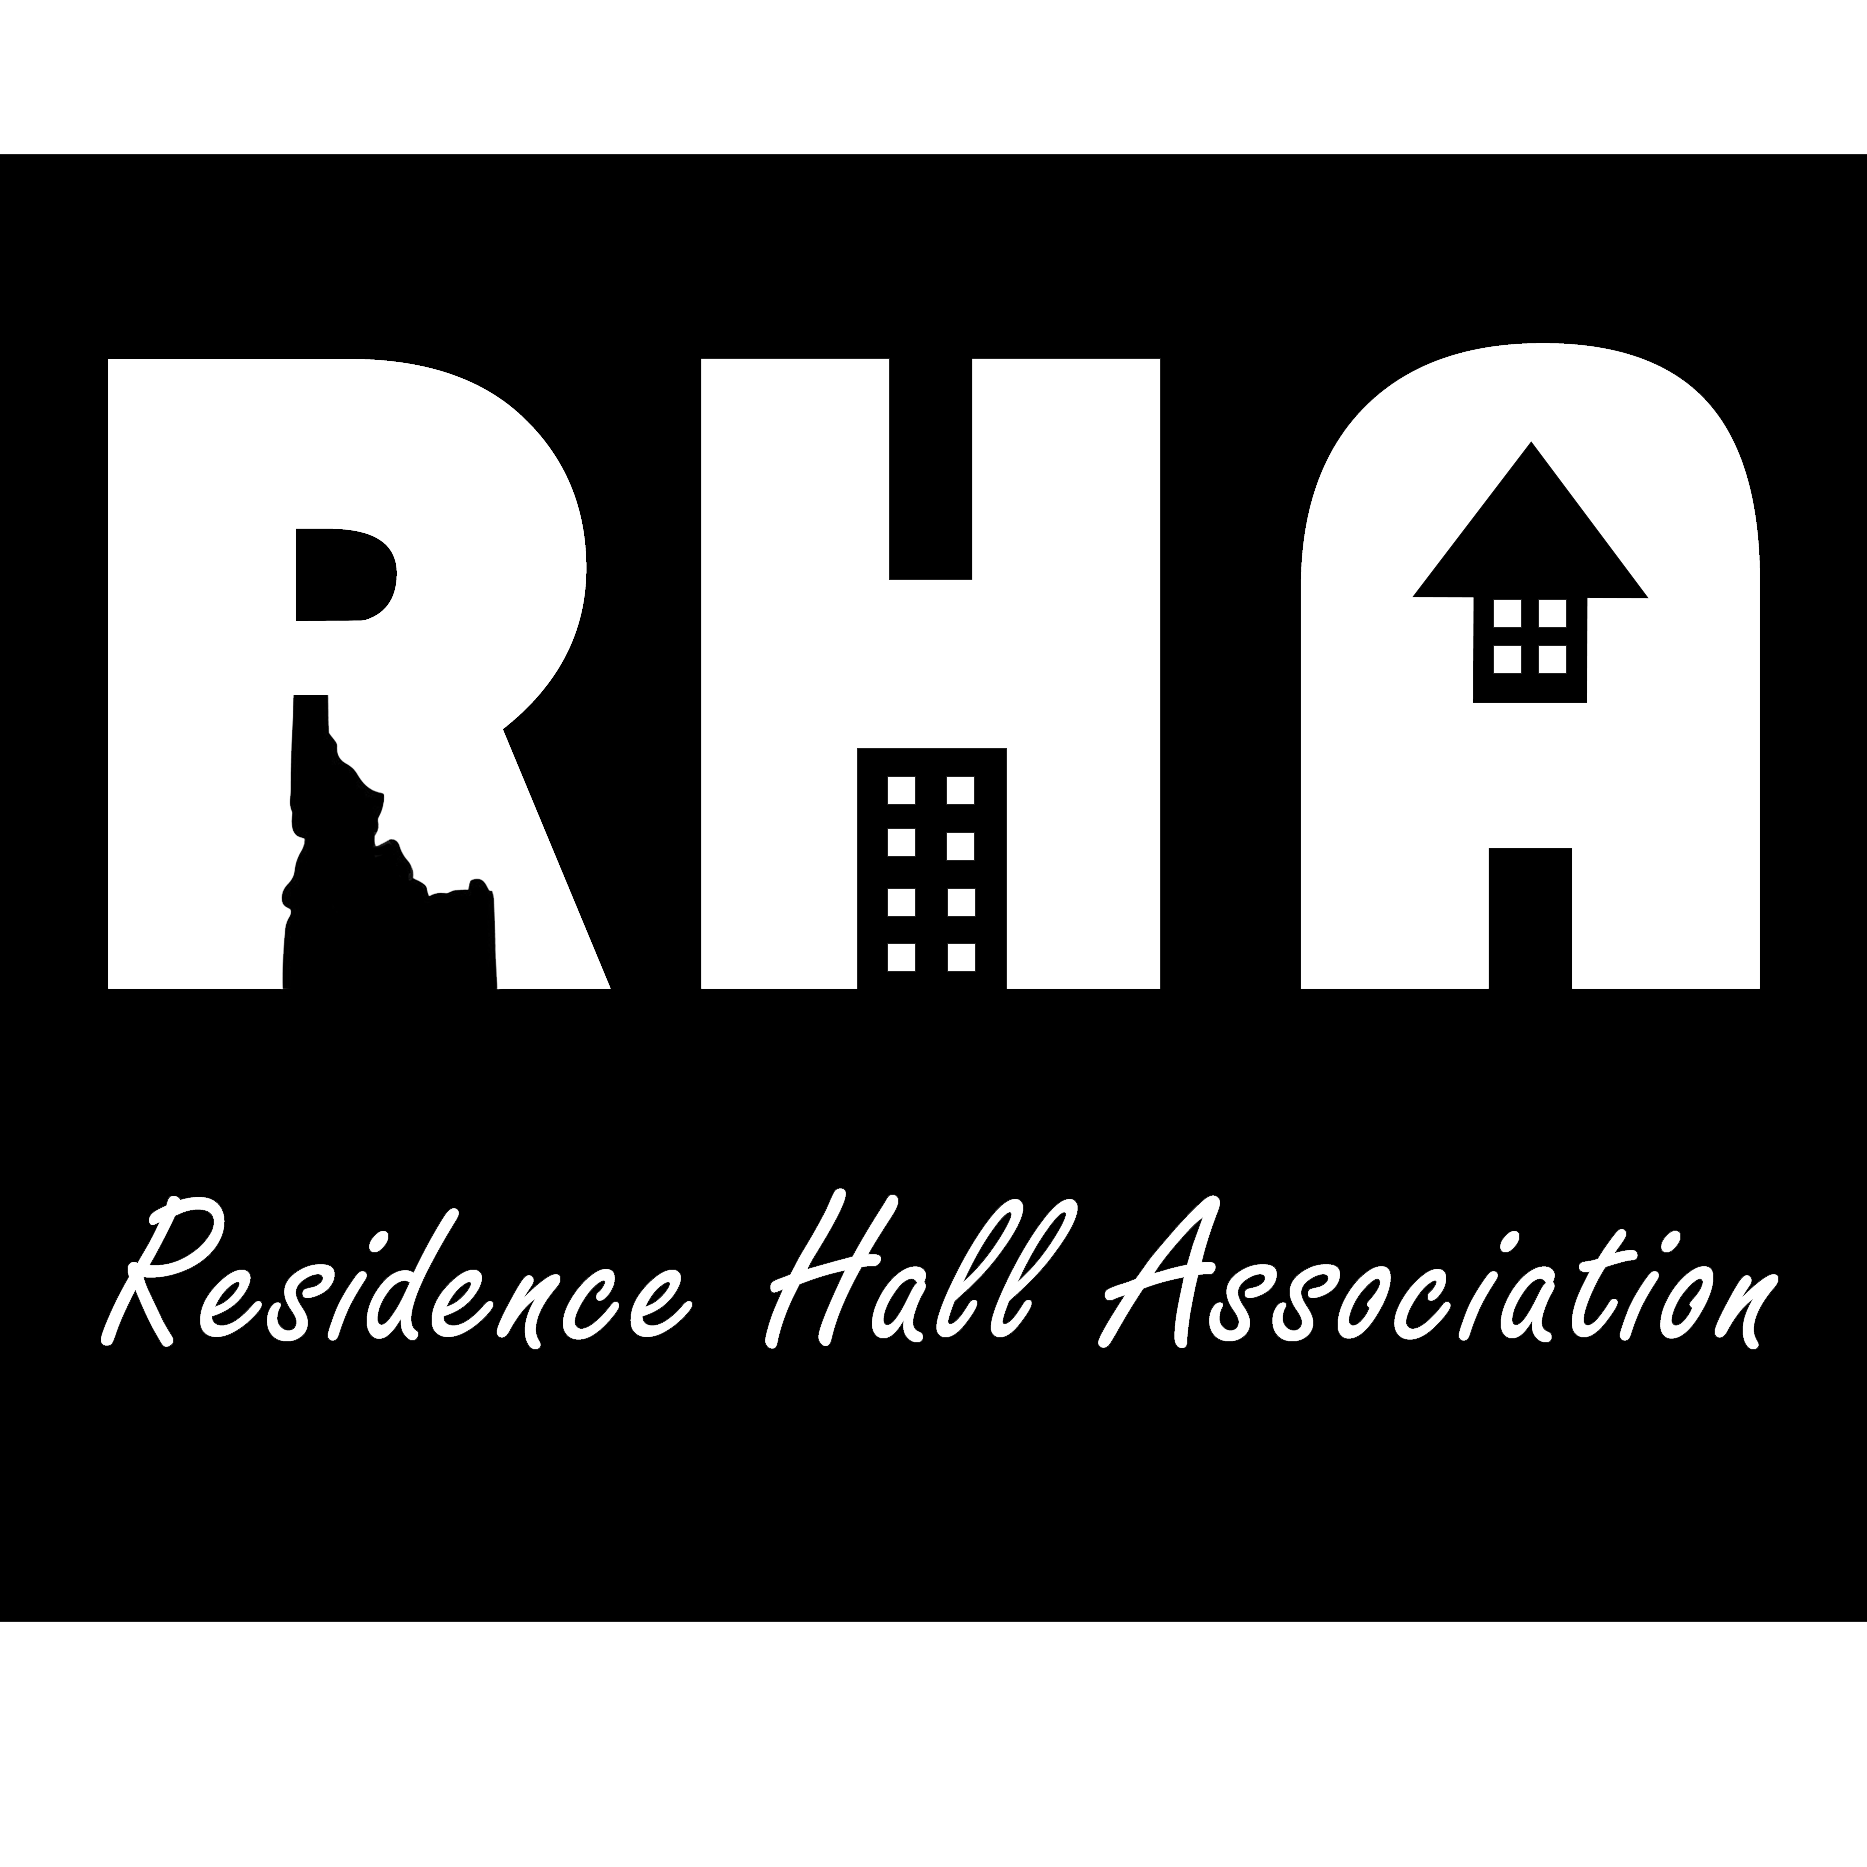 University of Idaho Residence Hall Association. RHA is a student organization comprised of every student who lives in the residence halls.